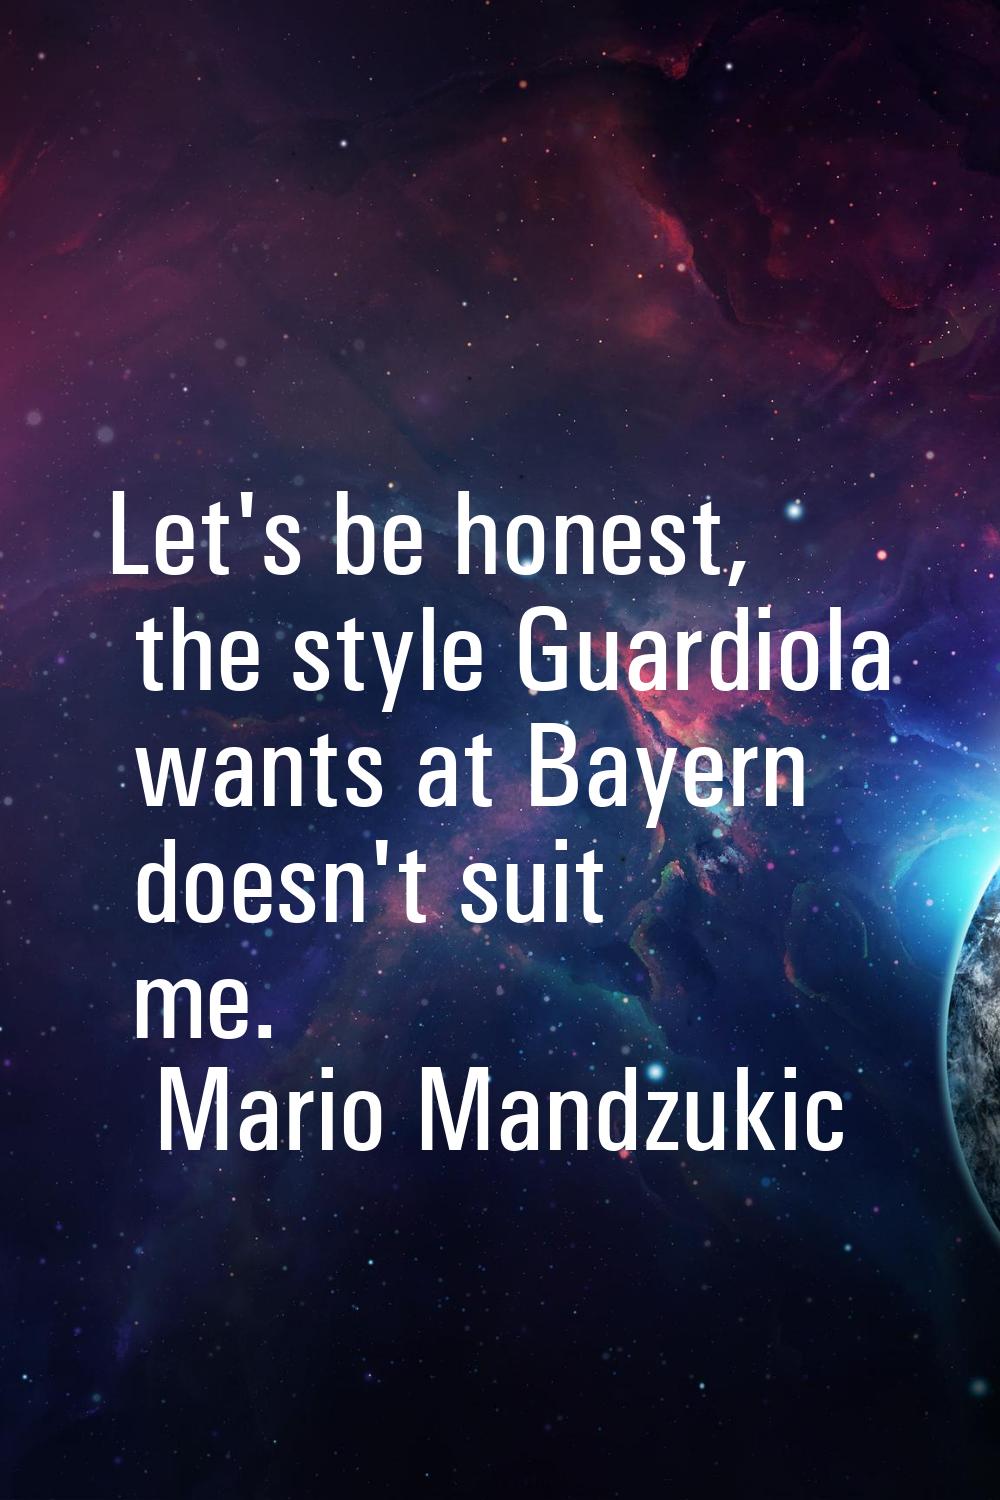 Let's be honest, the style Guardiola wants at Bayern doesn't suit me.